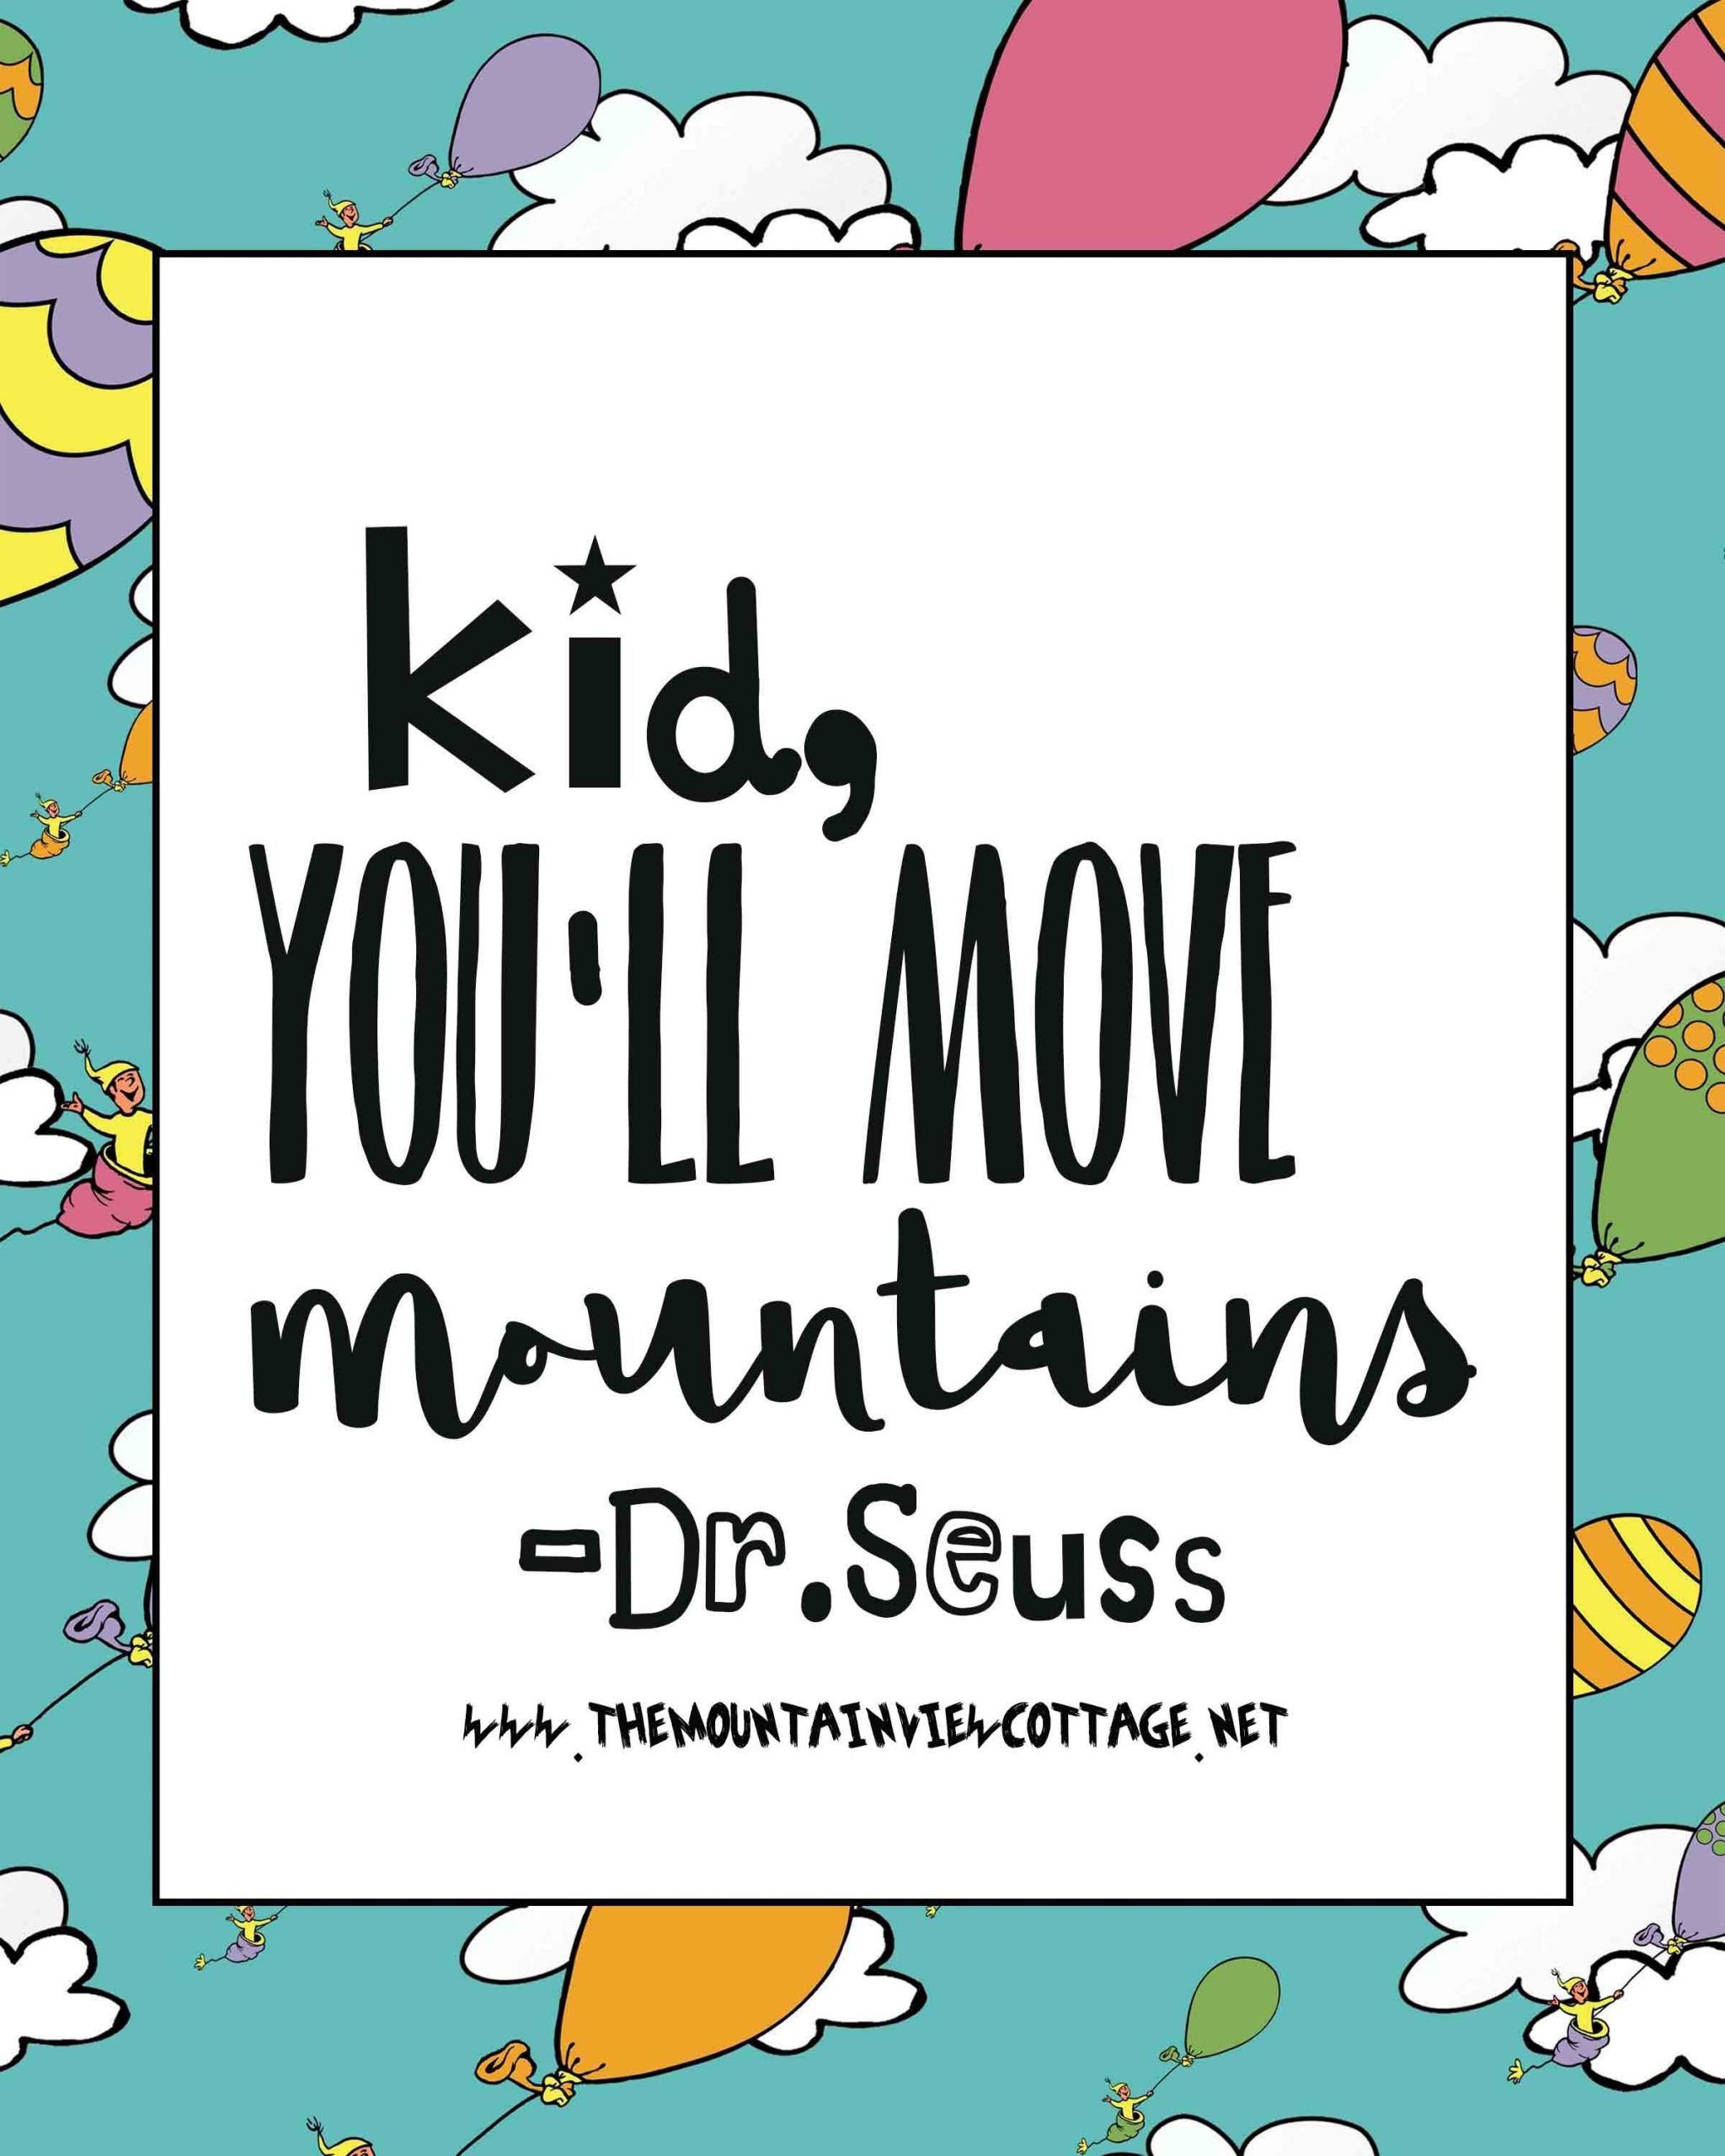 Dr.Seuss Quotes For Graduation
 21 Incredible Dr Seuss Quotes The Mountain View Cottage